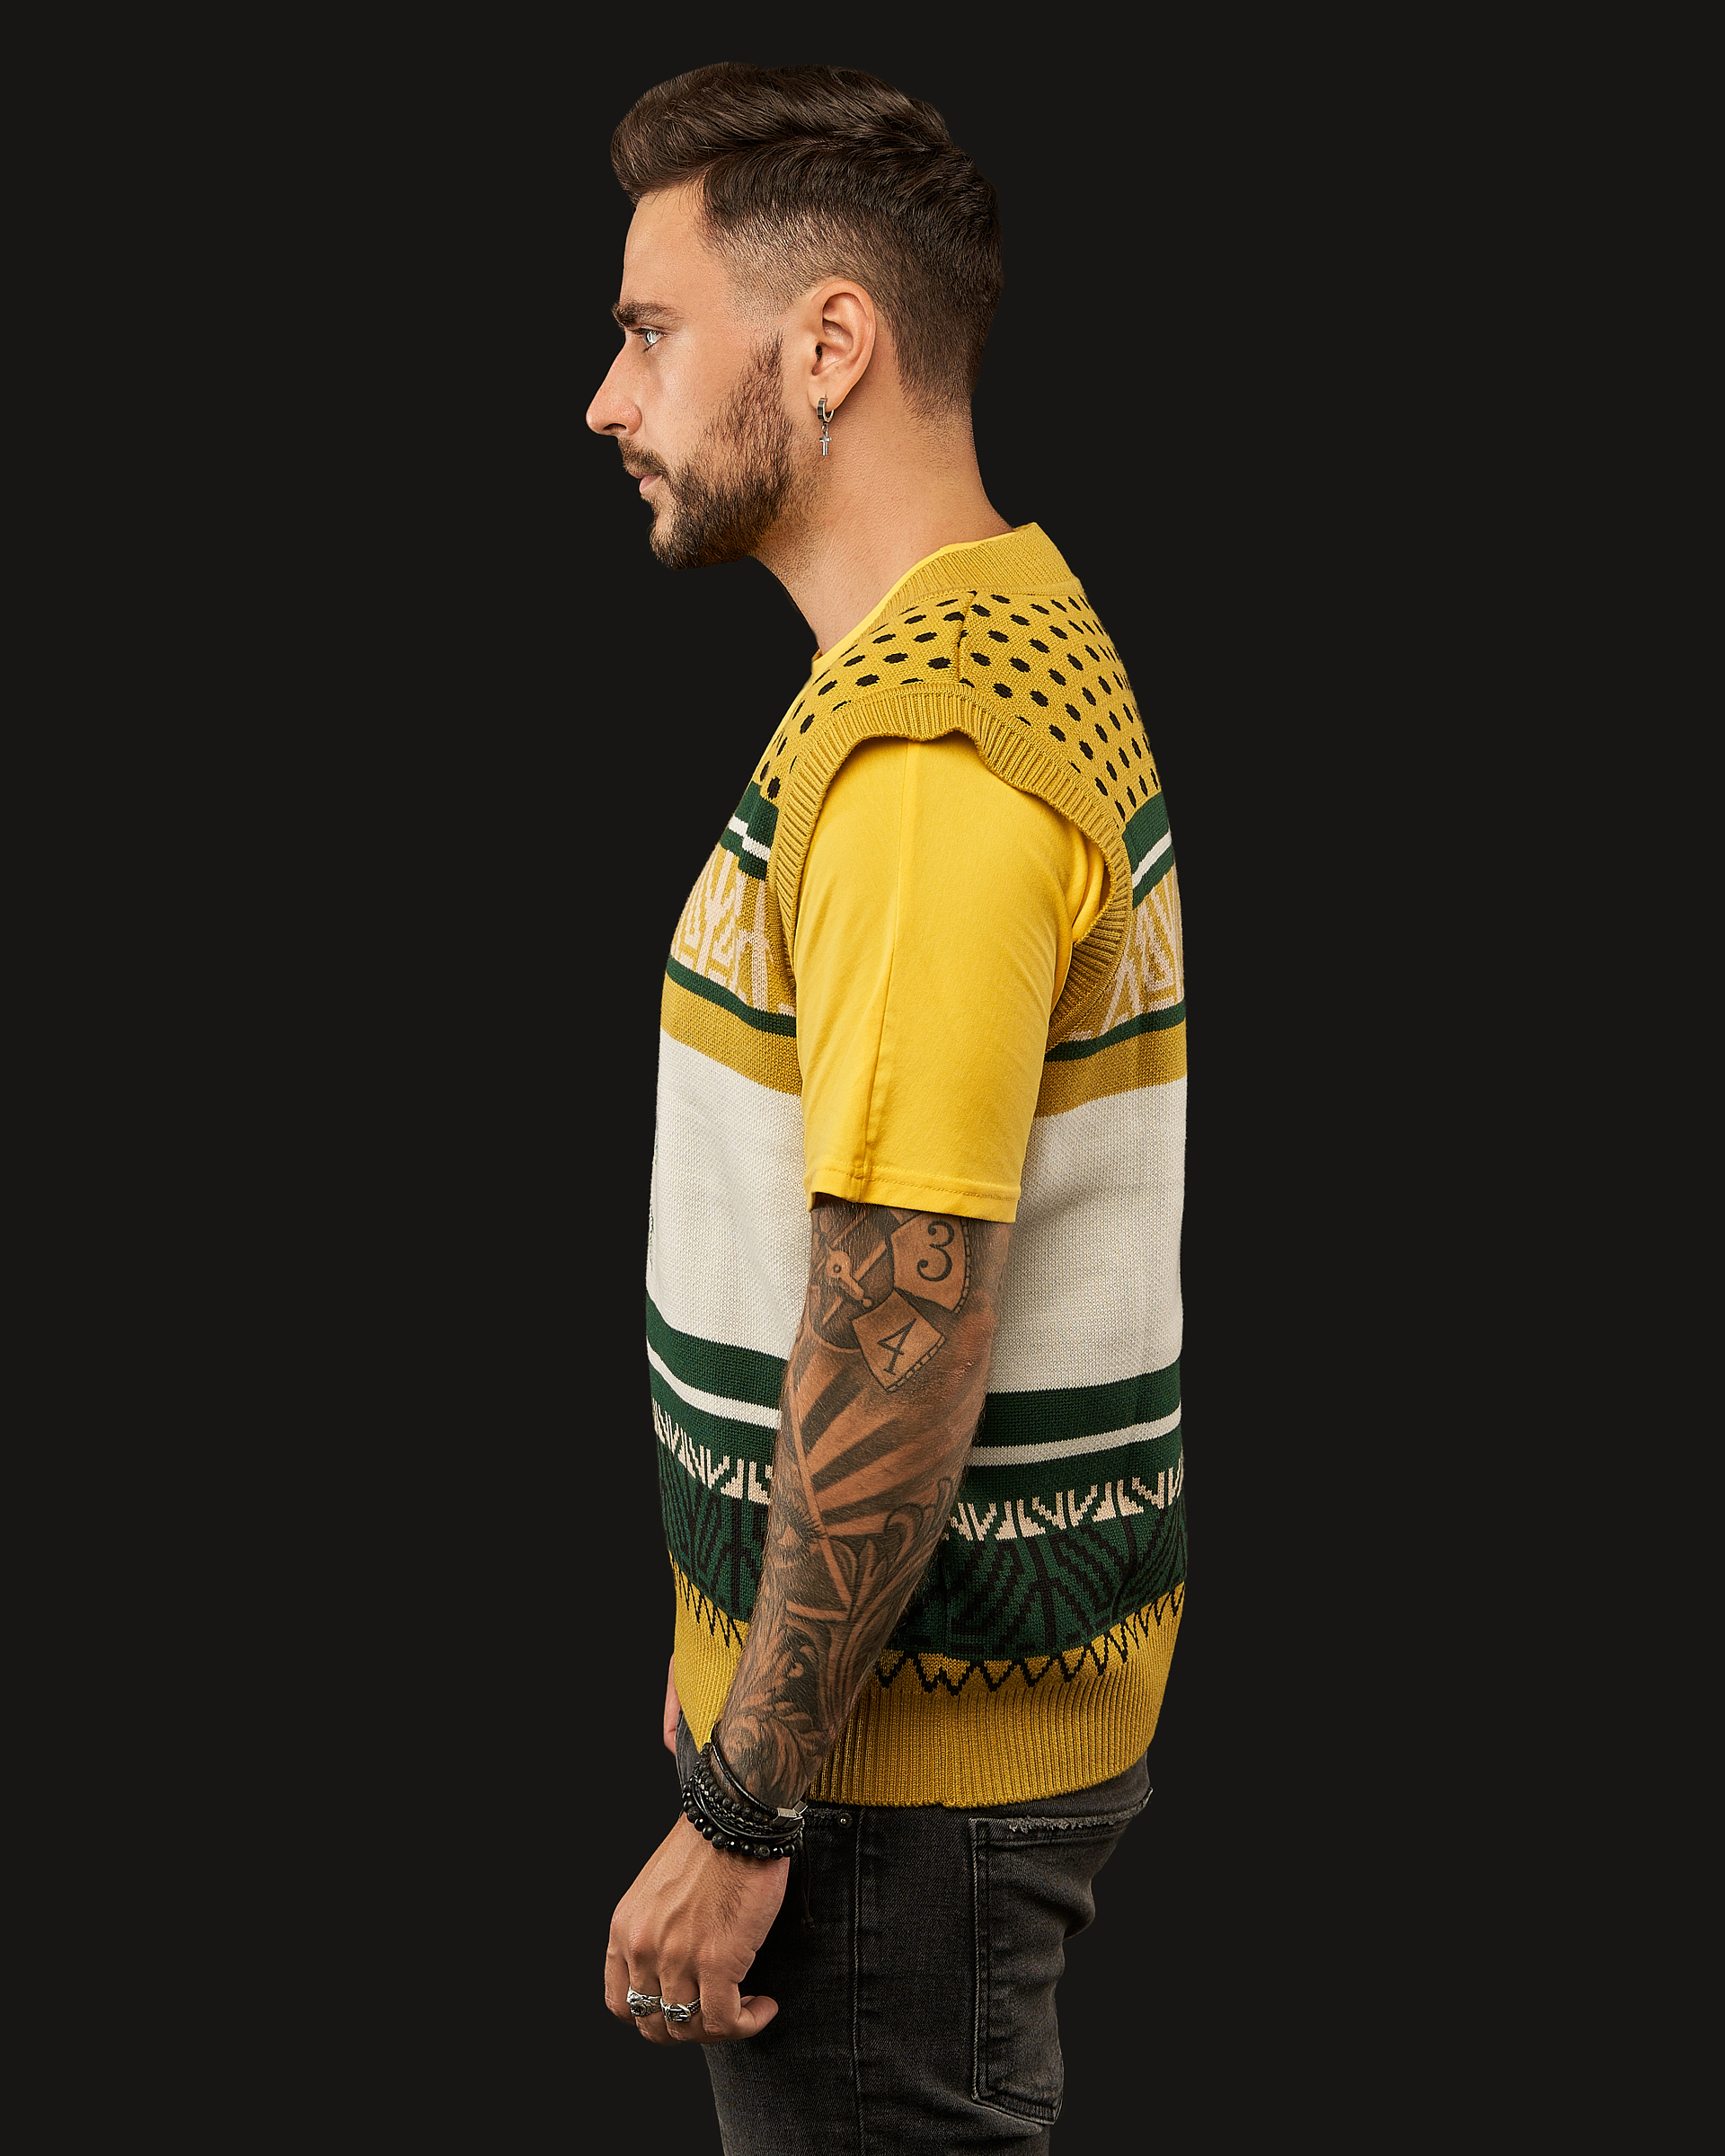 Knitted vest Image: https://ohueno-official.com/wp-content/uploads/9.jpg